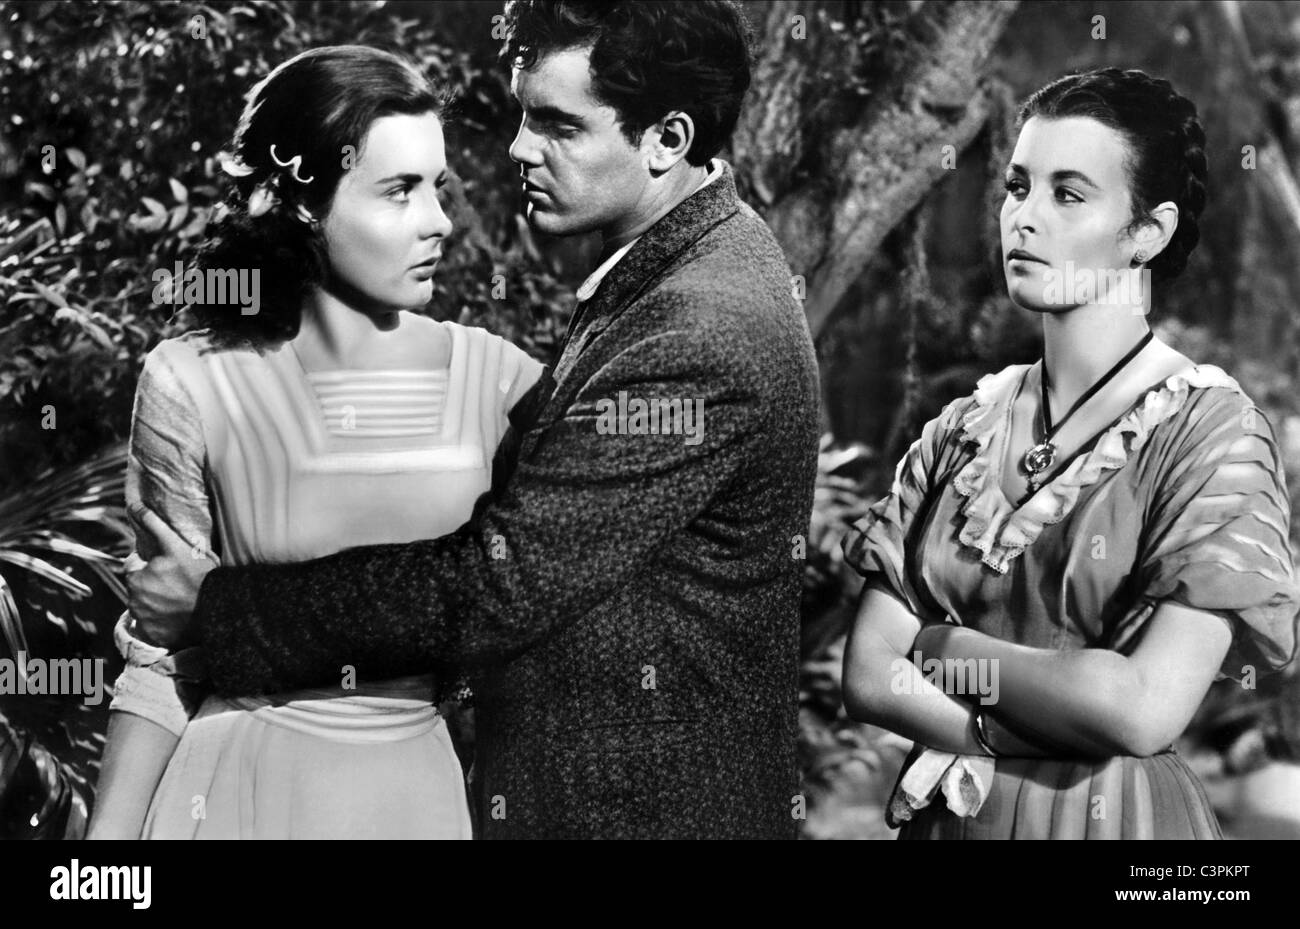 JEAN PETERS, JEFFREY HUNTER, CONSTANCE SMITH, LURE OF THE WILDERNESS, 1952 Stock Photo